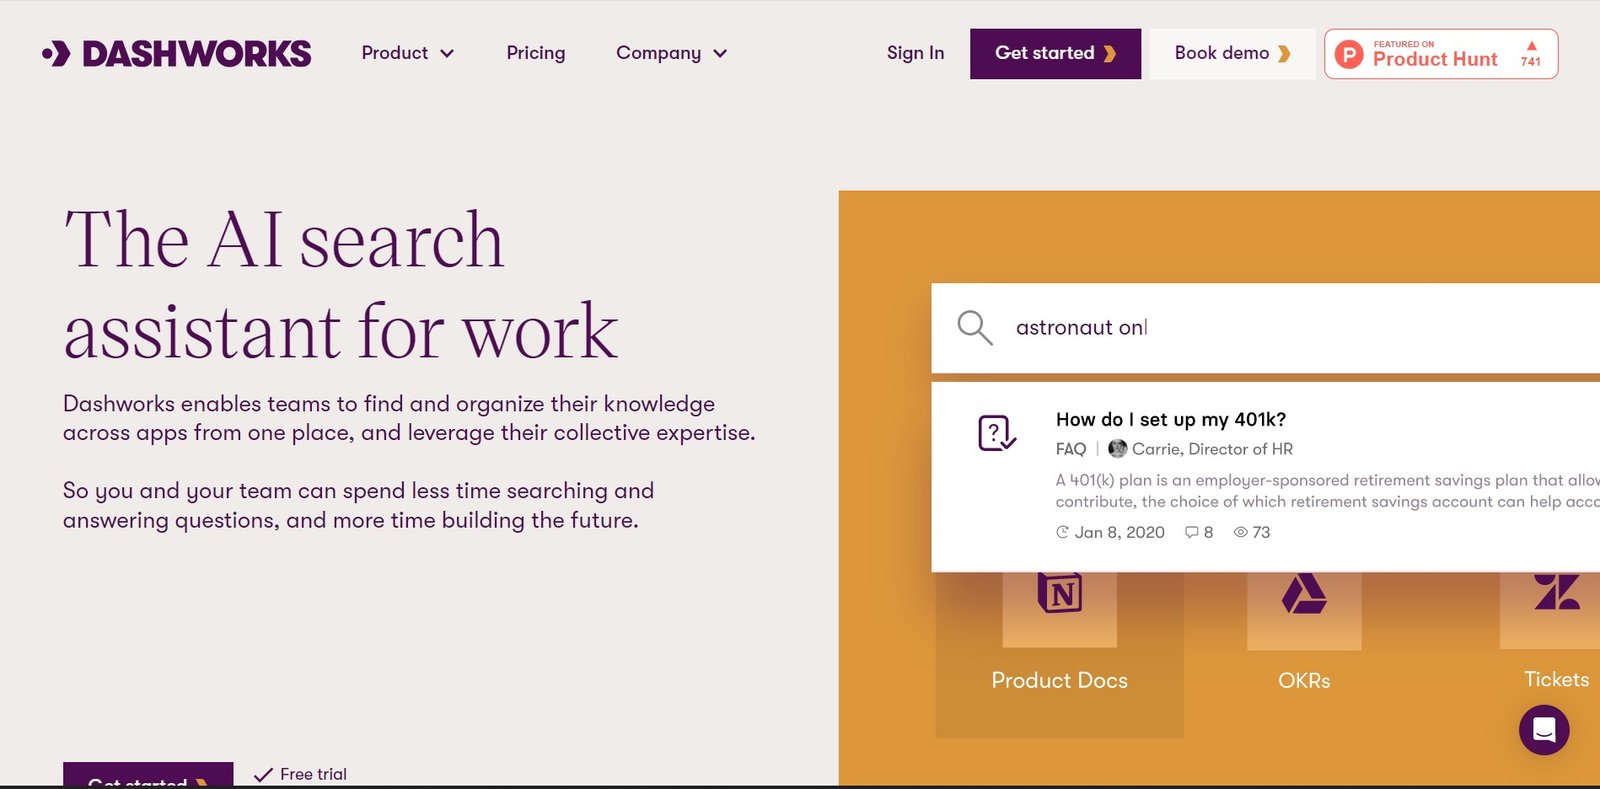 Dashworks is an AI search assistant for efficient knowledge discovery and organization for teams